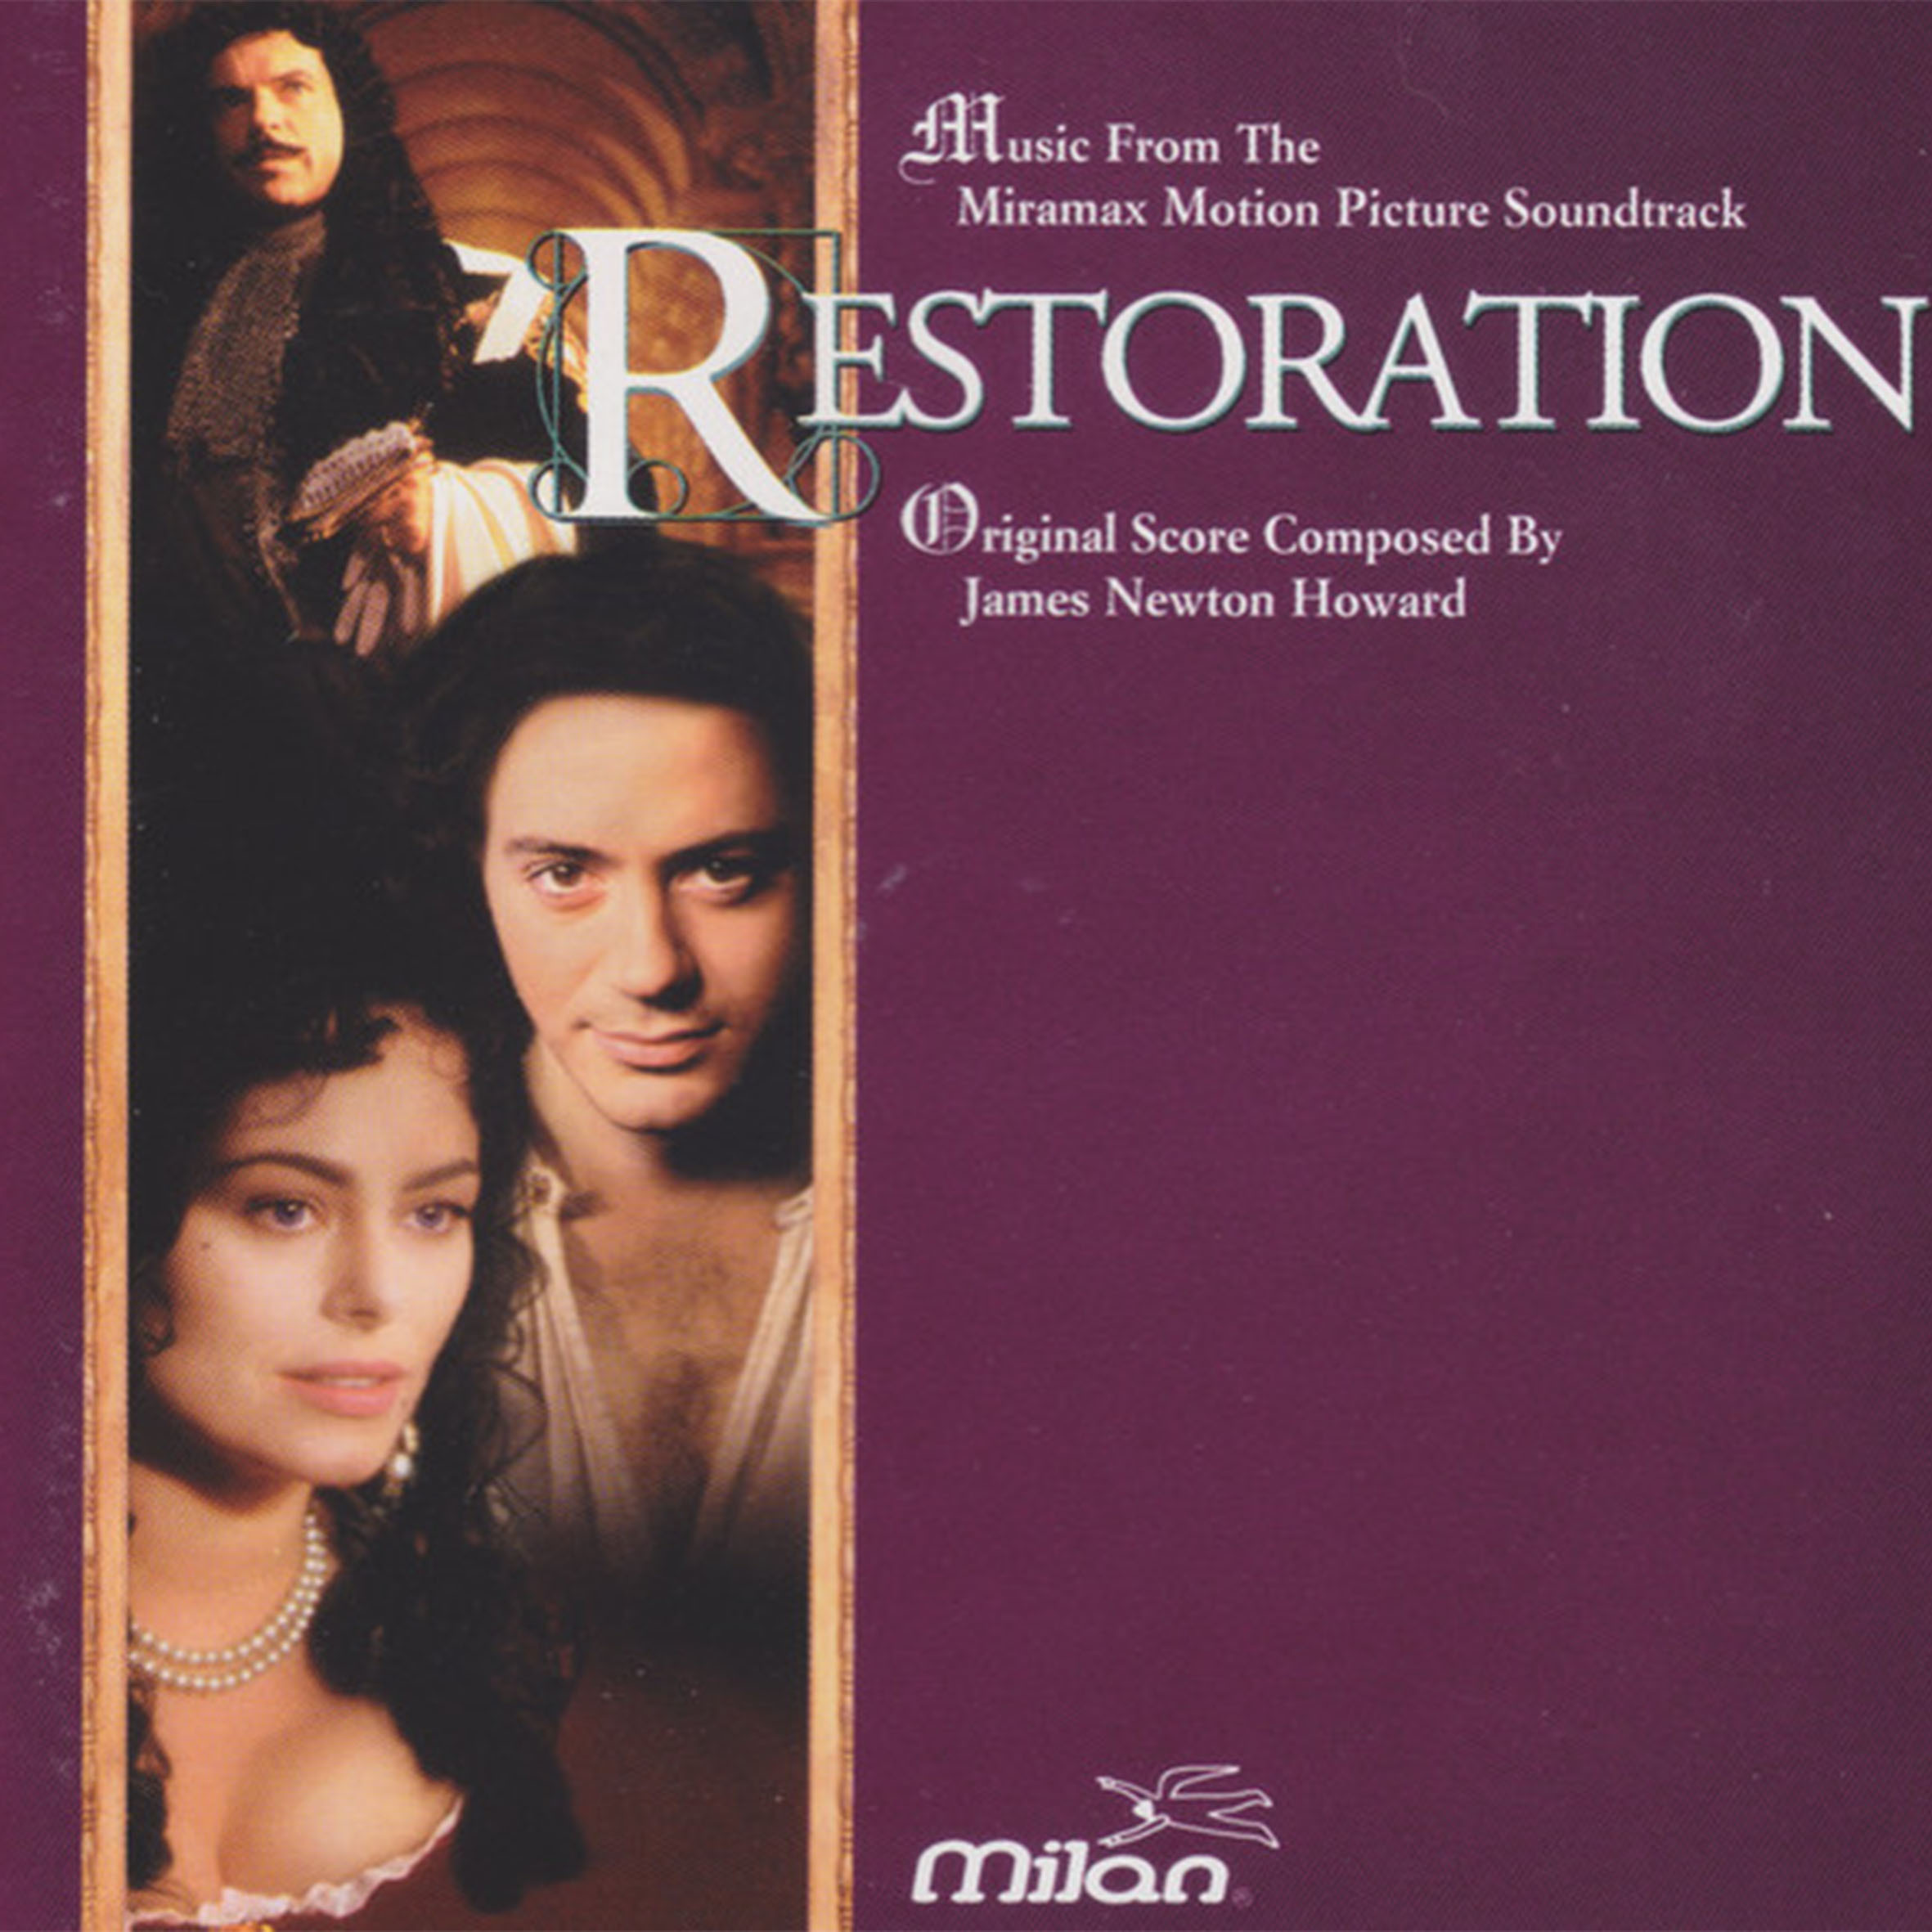 CD - Restoration - Music From The Miramax Motion Picture Soundtrack